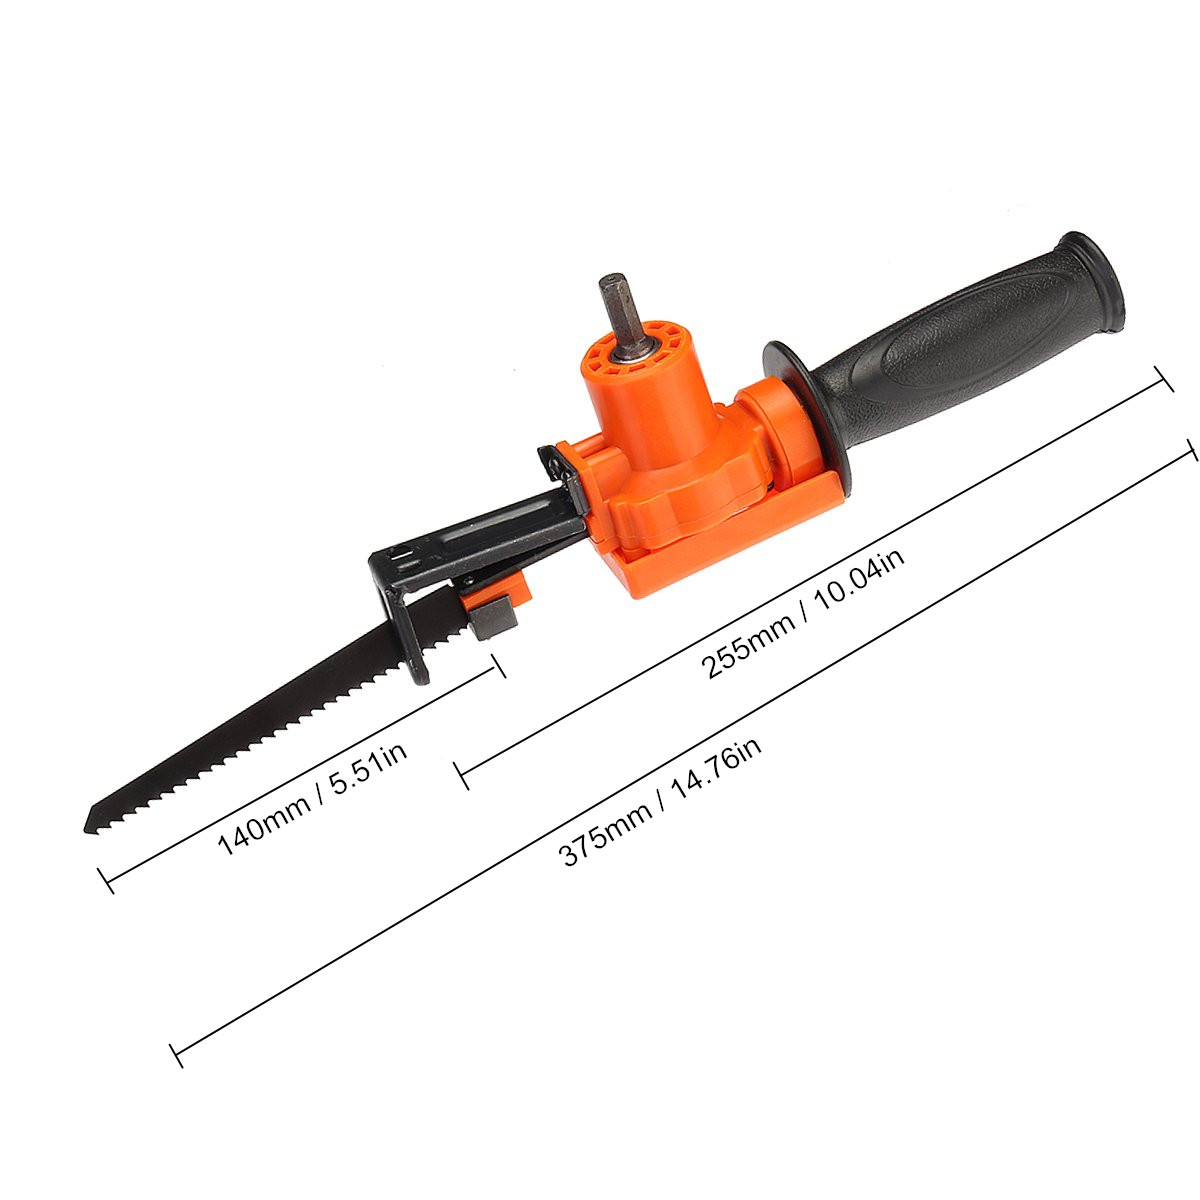 Reciprocating-Saw-Attachment-Adapter-Metal-Cutting-Tools-Electric-Drill-Attachment-2-Blades-1722798-4